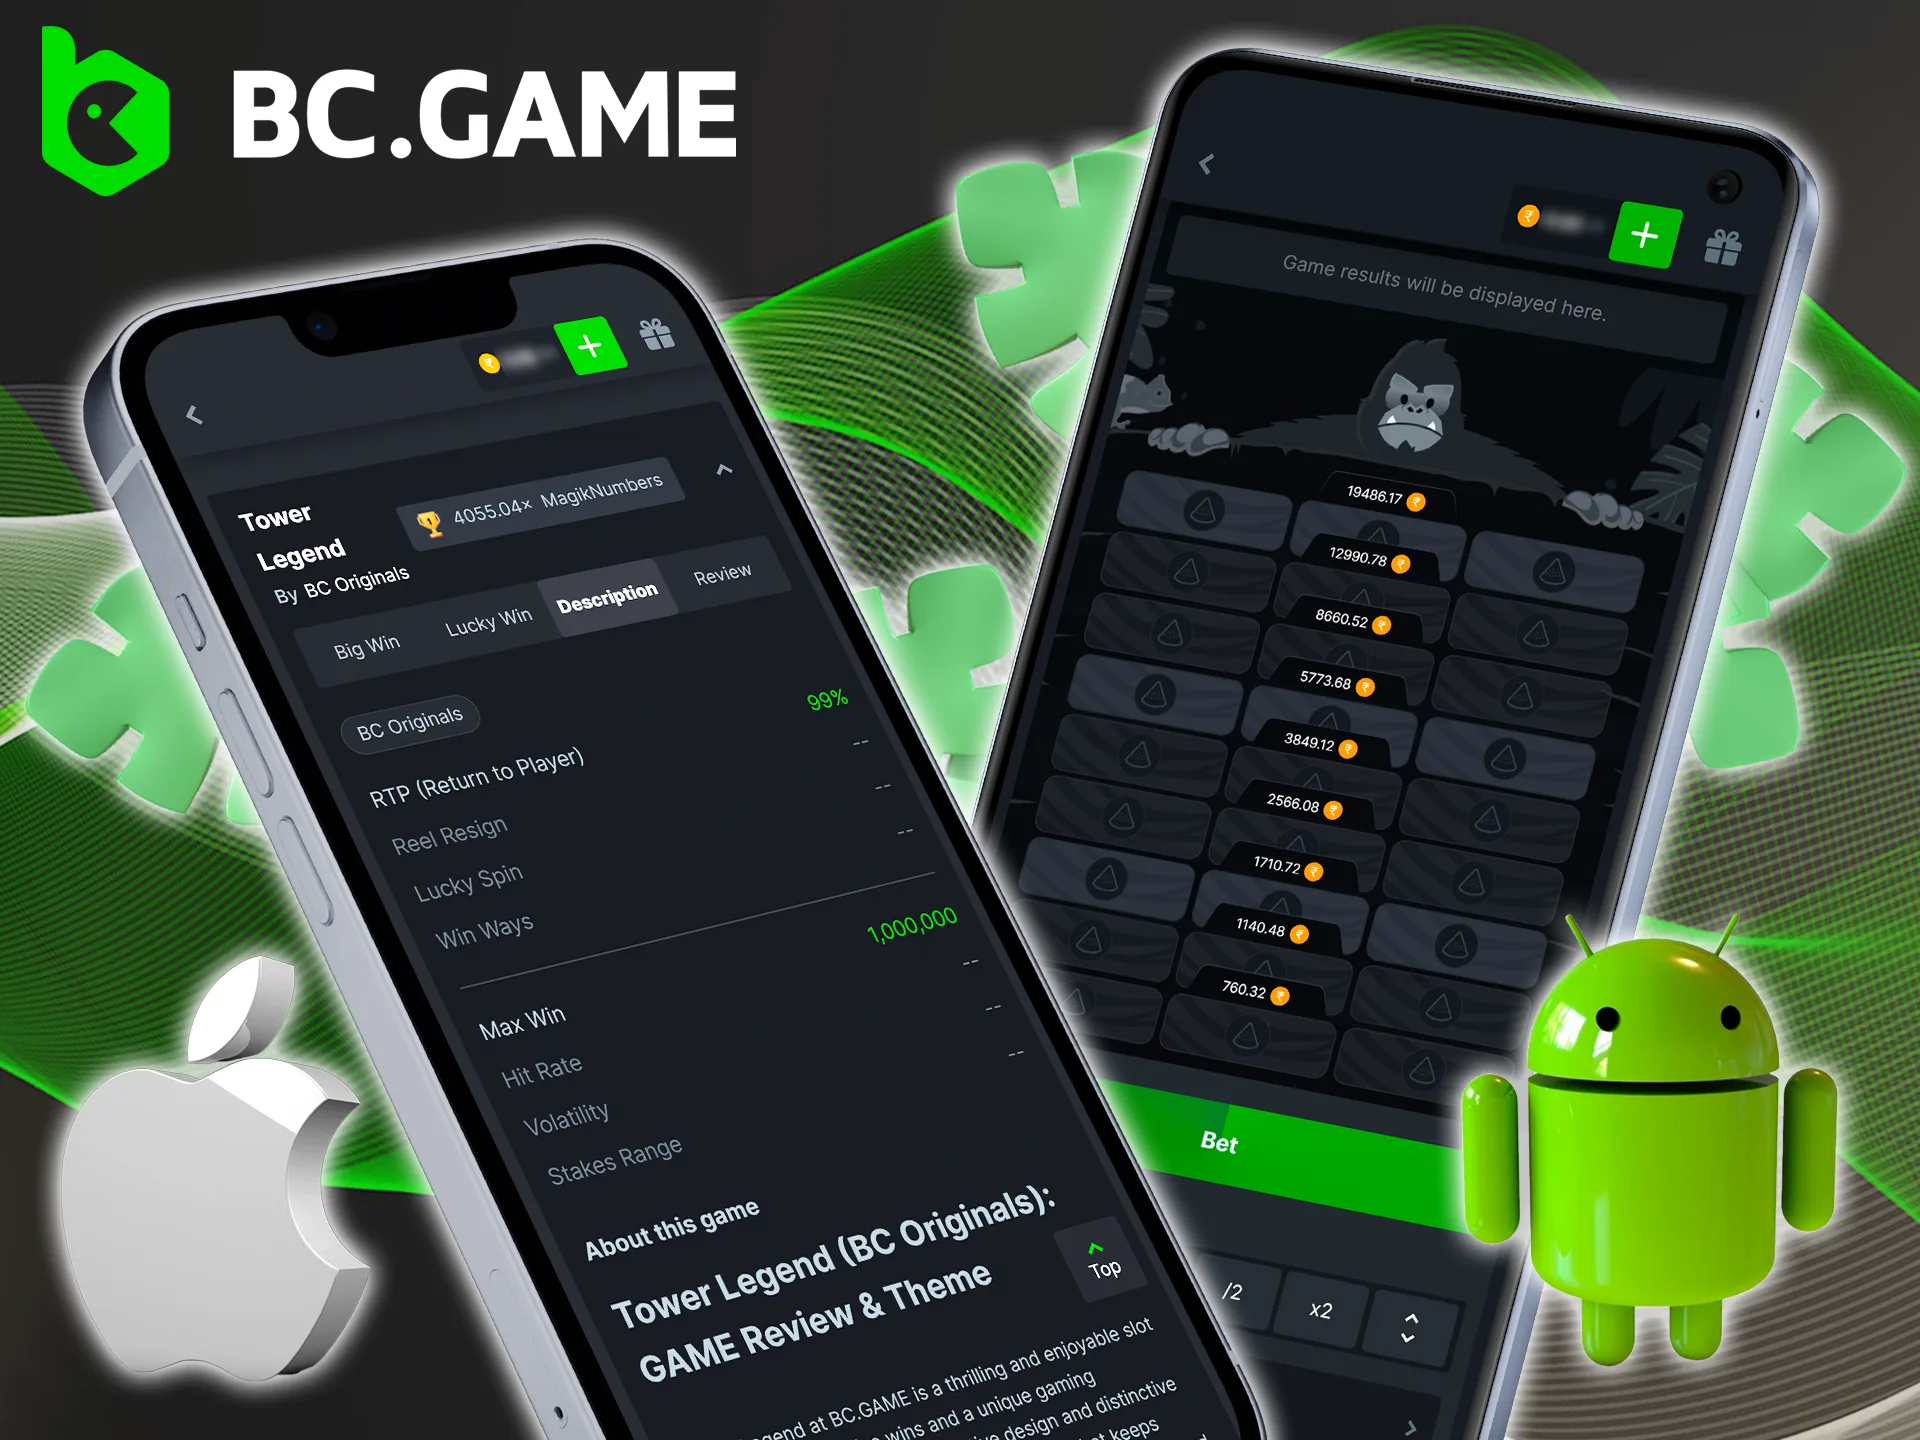 Play Tower Legend anywhere with the BC Game app.